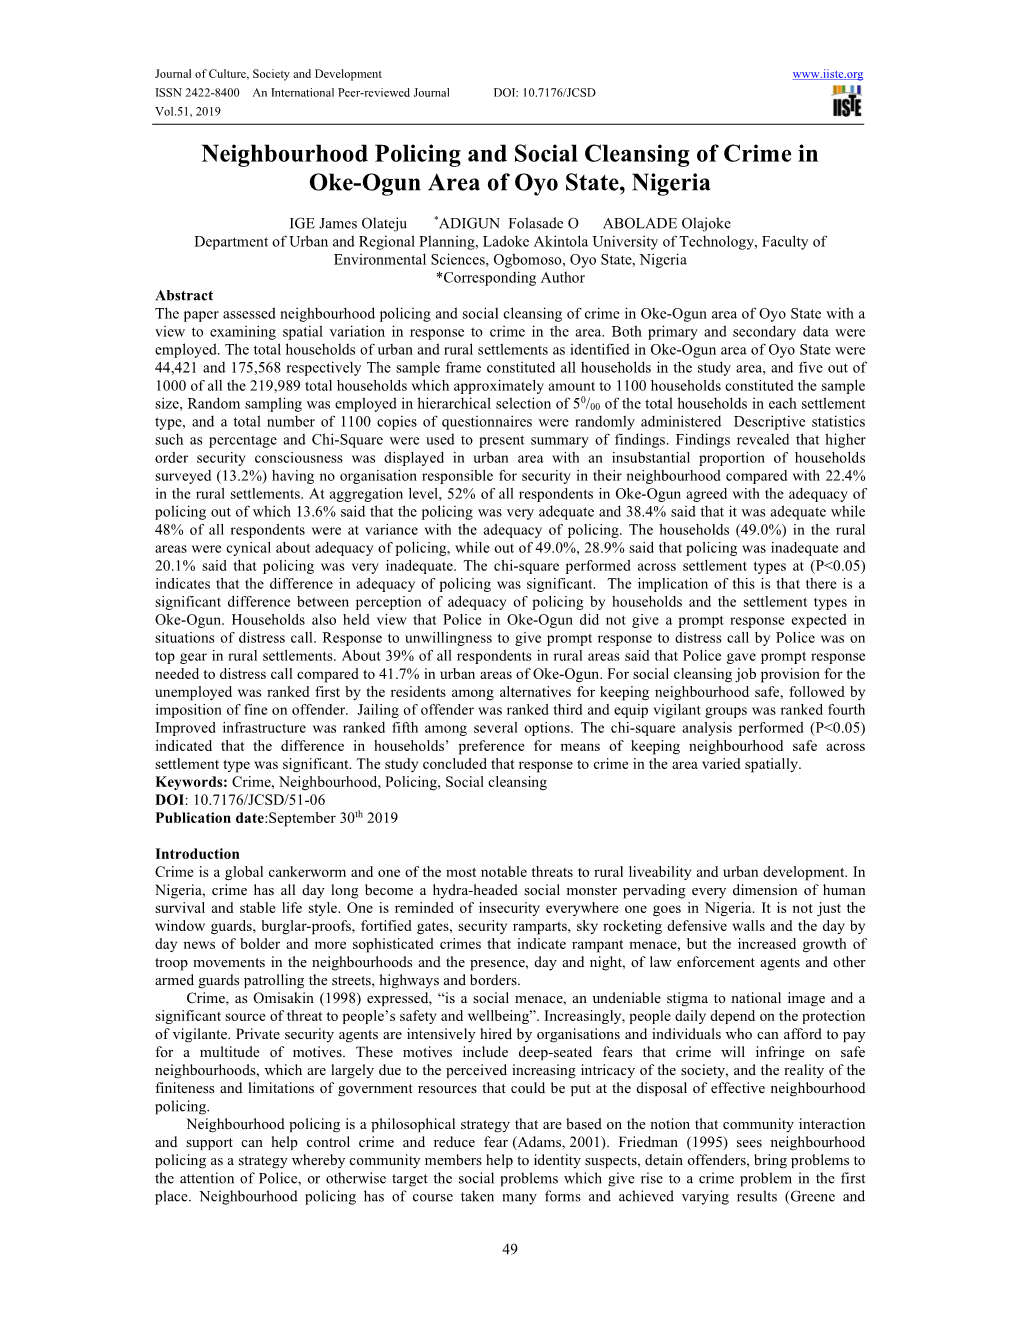 Neighbourhood Policing and Social Cleansing of Crime in Oke-Ogun Area of Oyo State, Nigeria